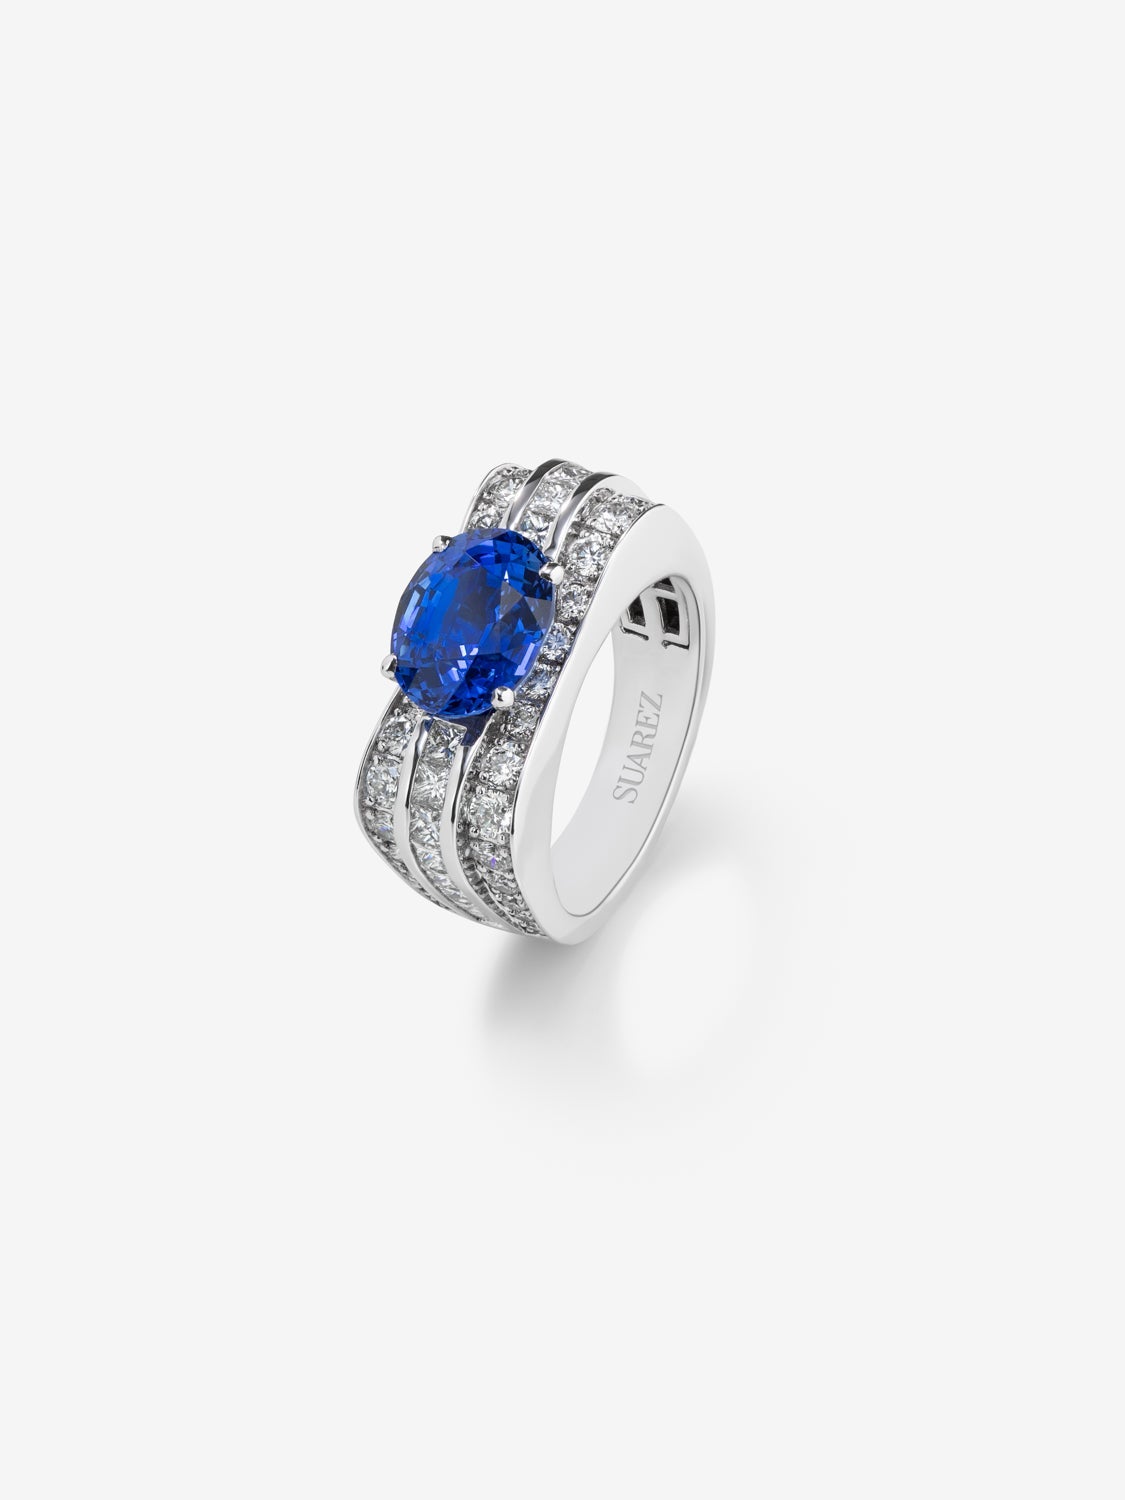 18K white gold ring with oval-cut blue sapphire 3.69 cts and 52 princess-cut and brilliant-cut diamonds with a total of 1.71 cts